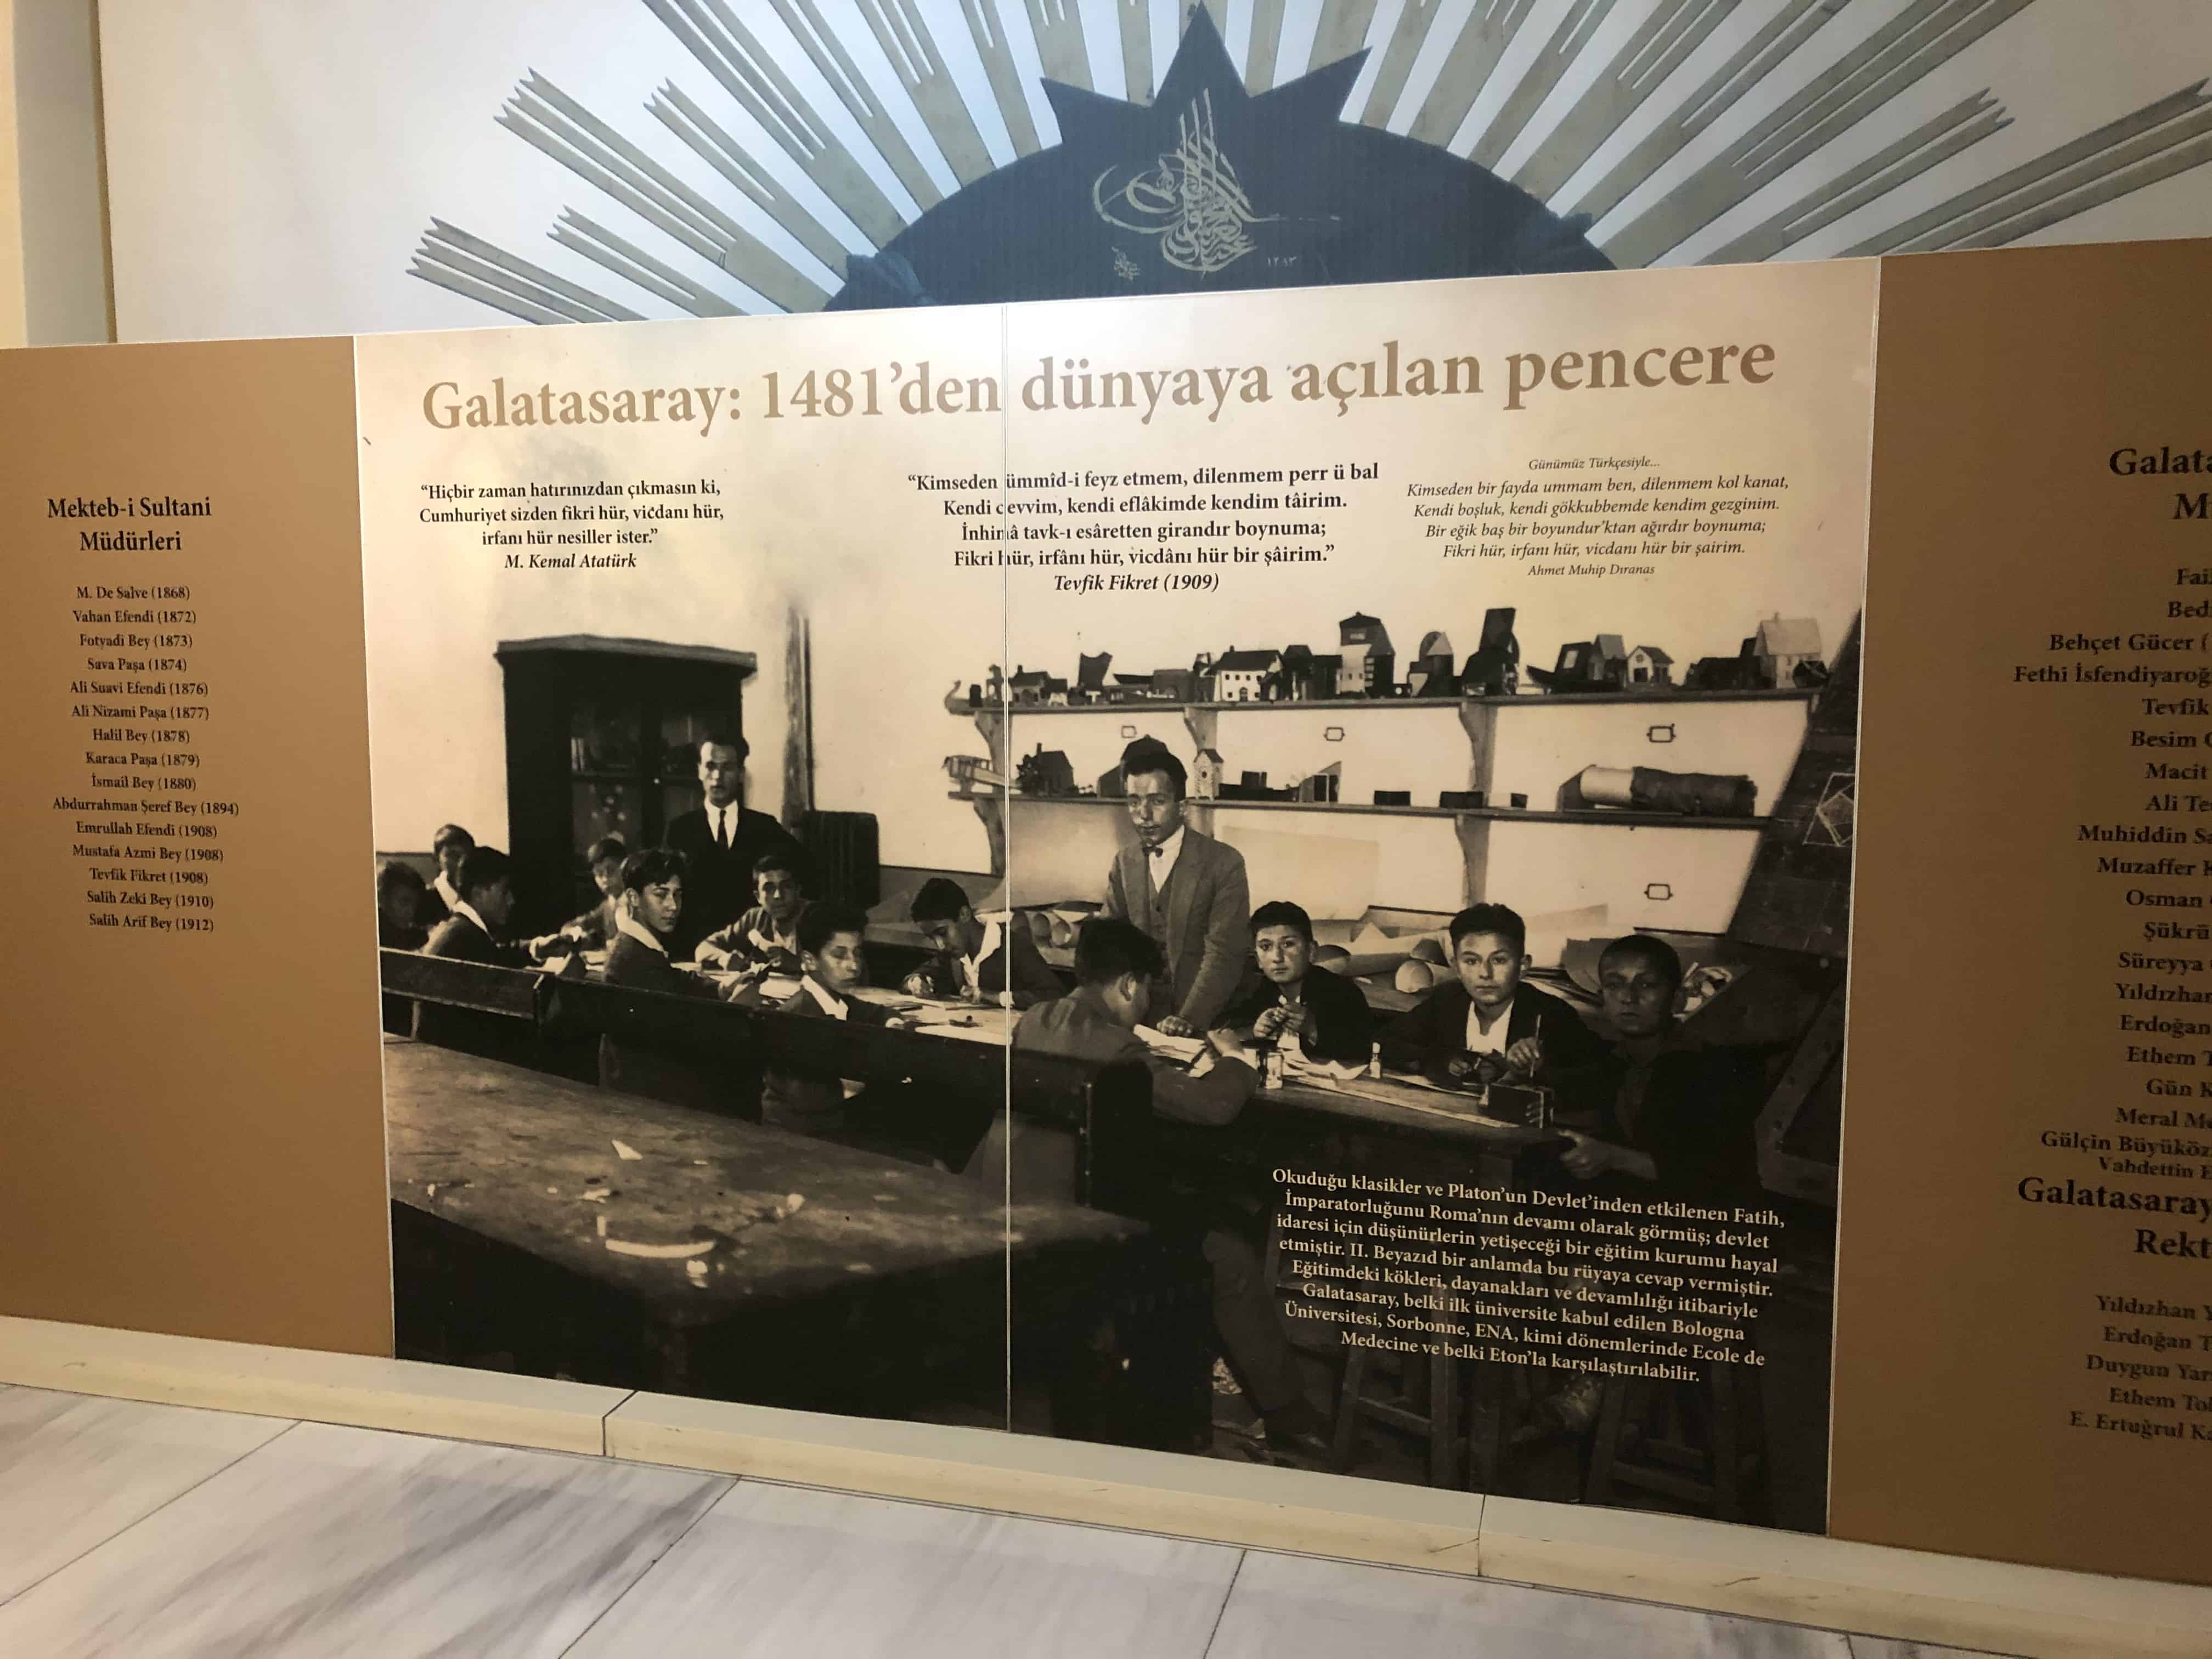 Galatasaray High School section at the Galatasaray Museum in Istanbul, Turkey